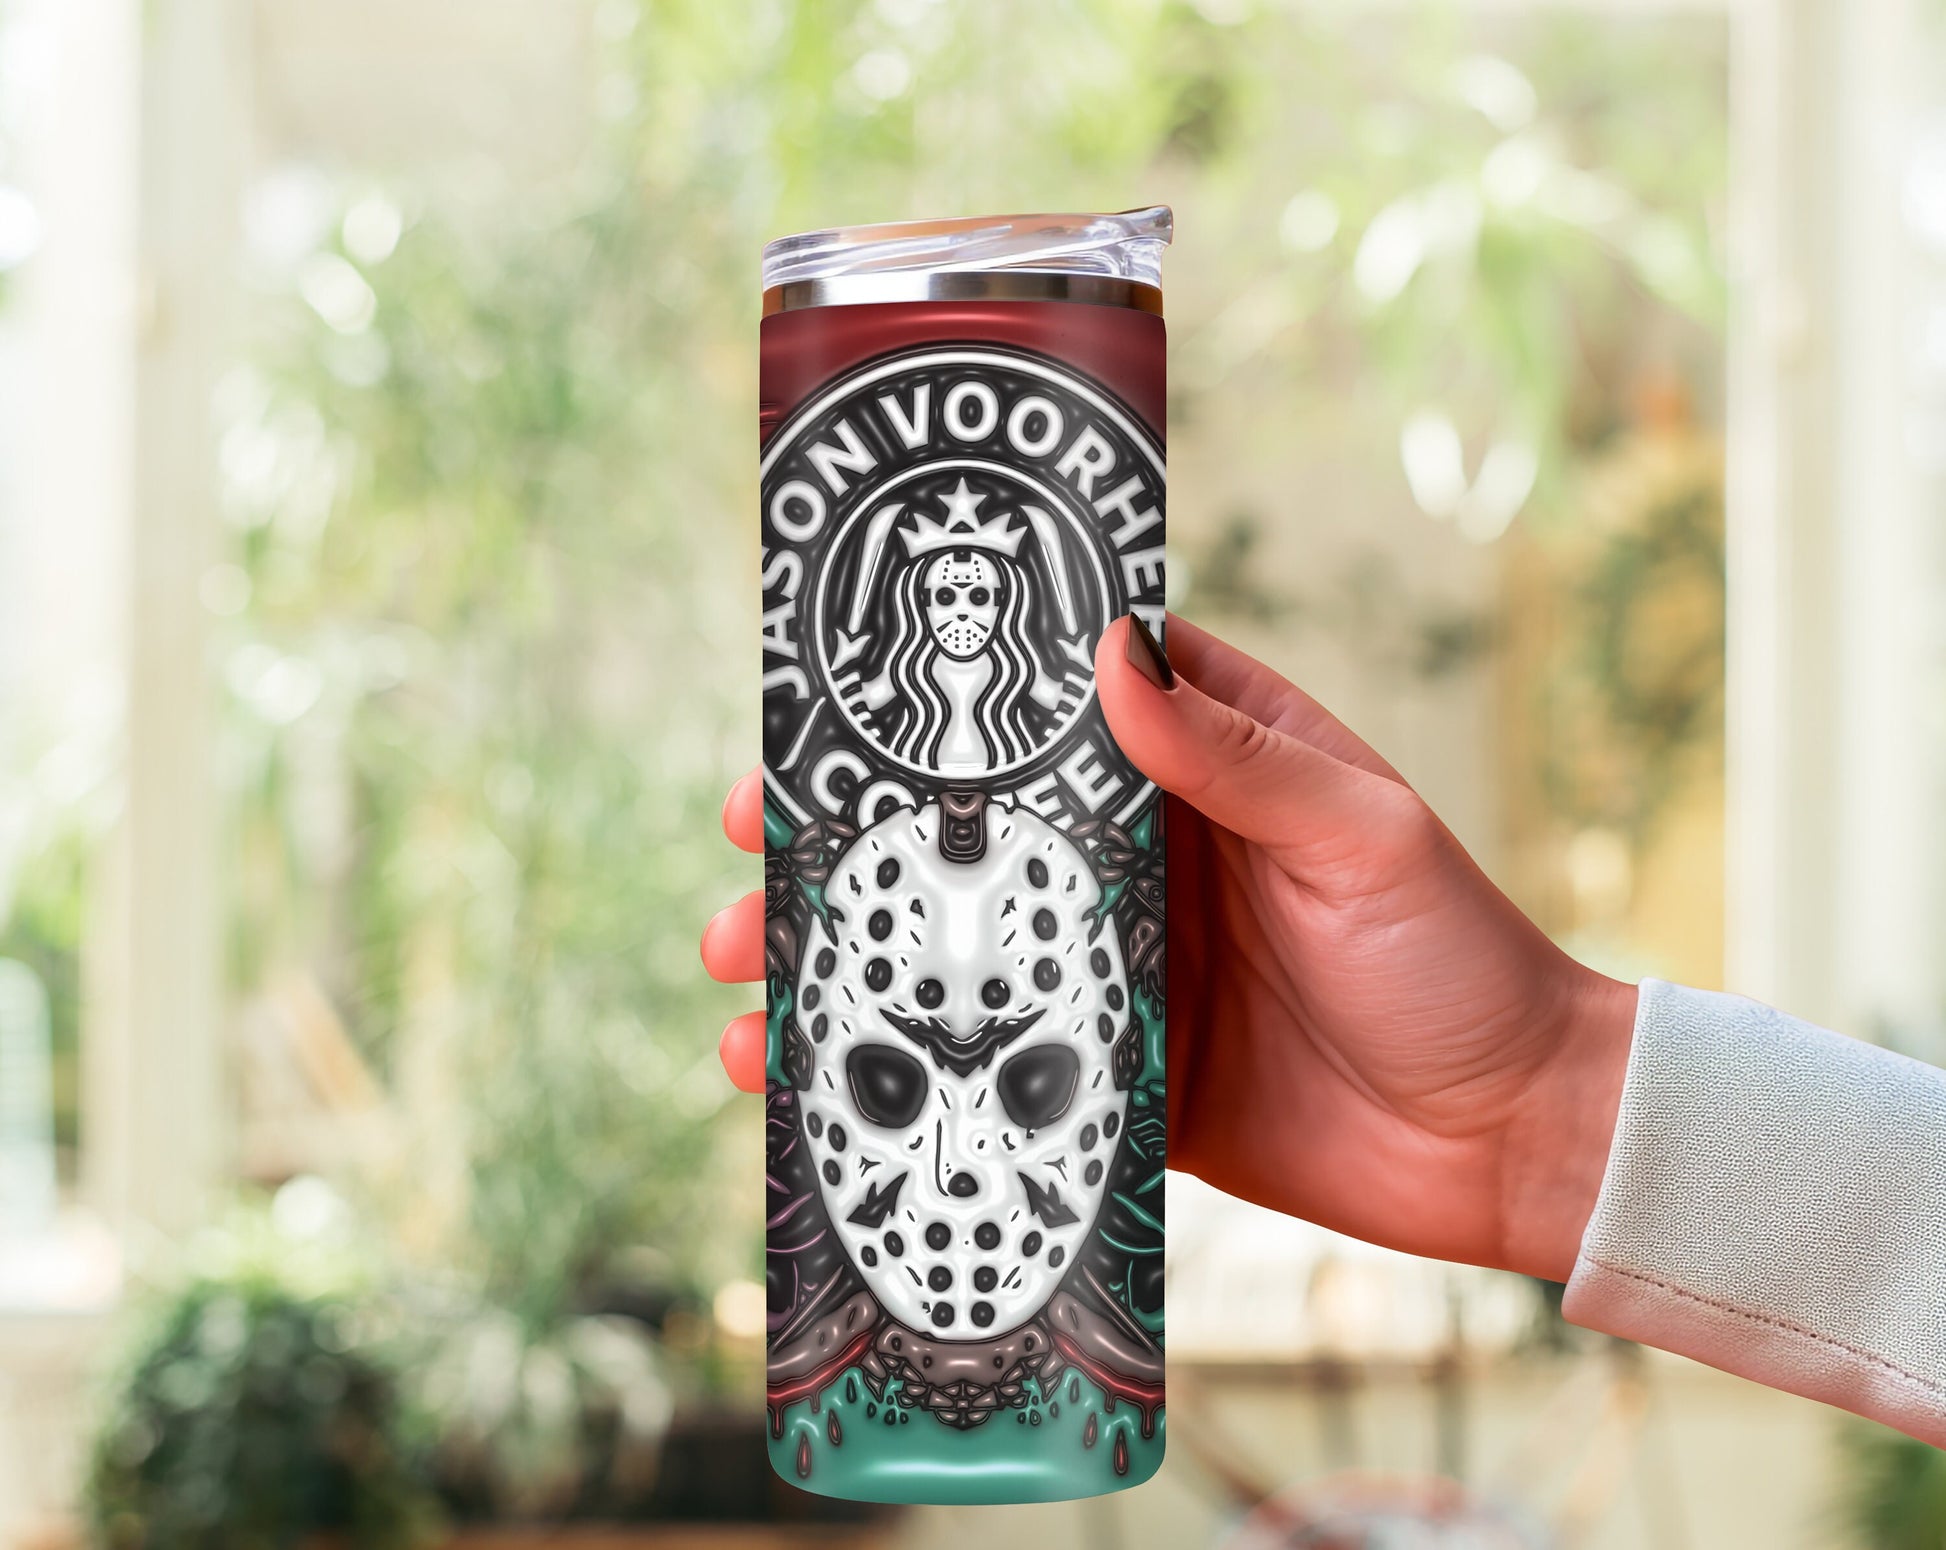 Jason Voorhees 20 oz Skinny Tumbler | Camp Crystal Lake Inspired Horror Cup | Spooky Halloween Tumbler | Friday the 13th Fan Gift